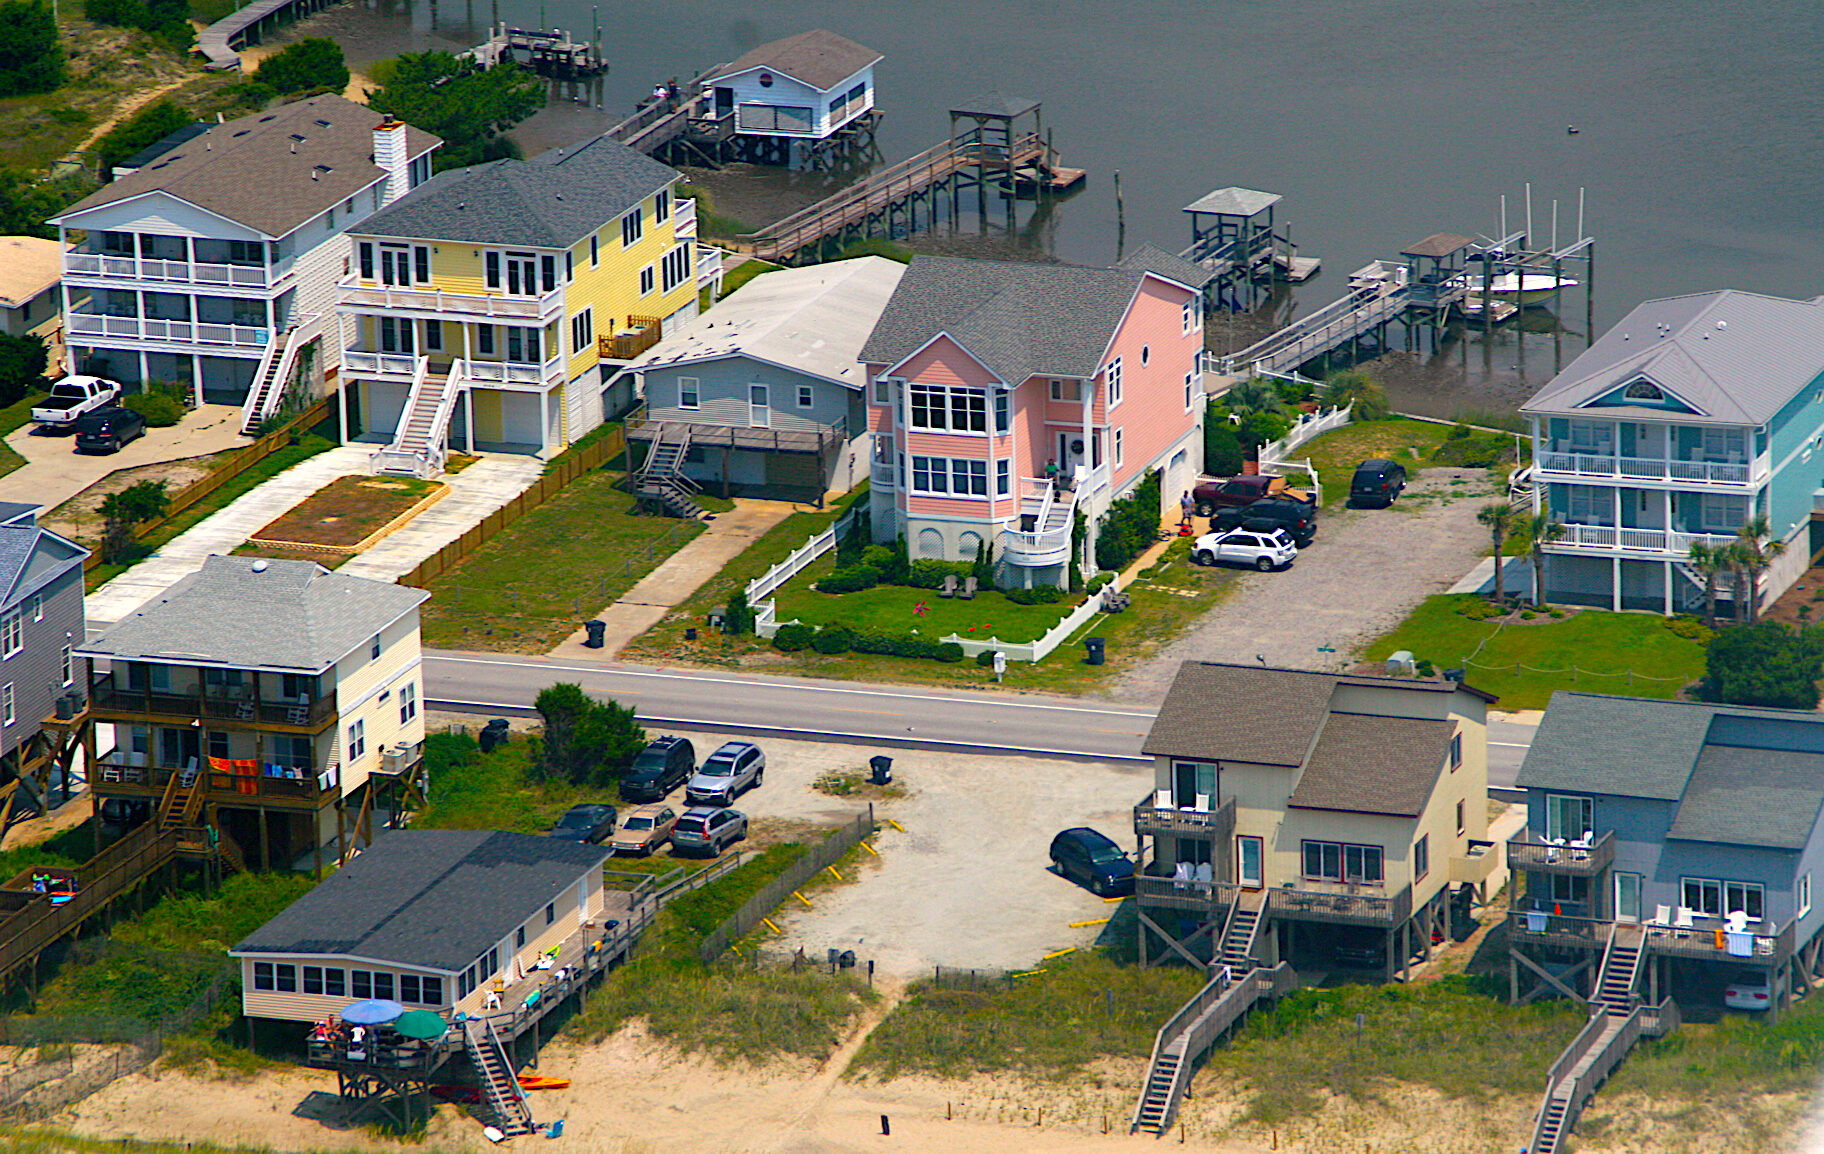 In 1986, Rogers helped start a committee that looked at building code requirements and recommended increasing the depth of pilings and the way buildings were constructed in North Carolina. Today, raised homes are prevalent along the coast, like these at Holden Beach. Credit: Doc Searls CC BY-SA 2.0.